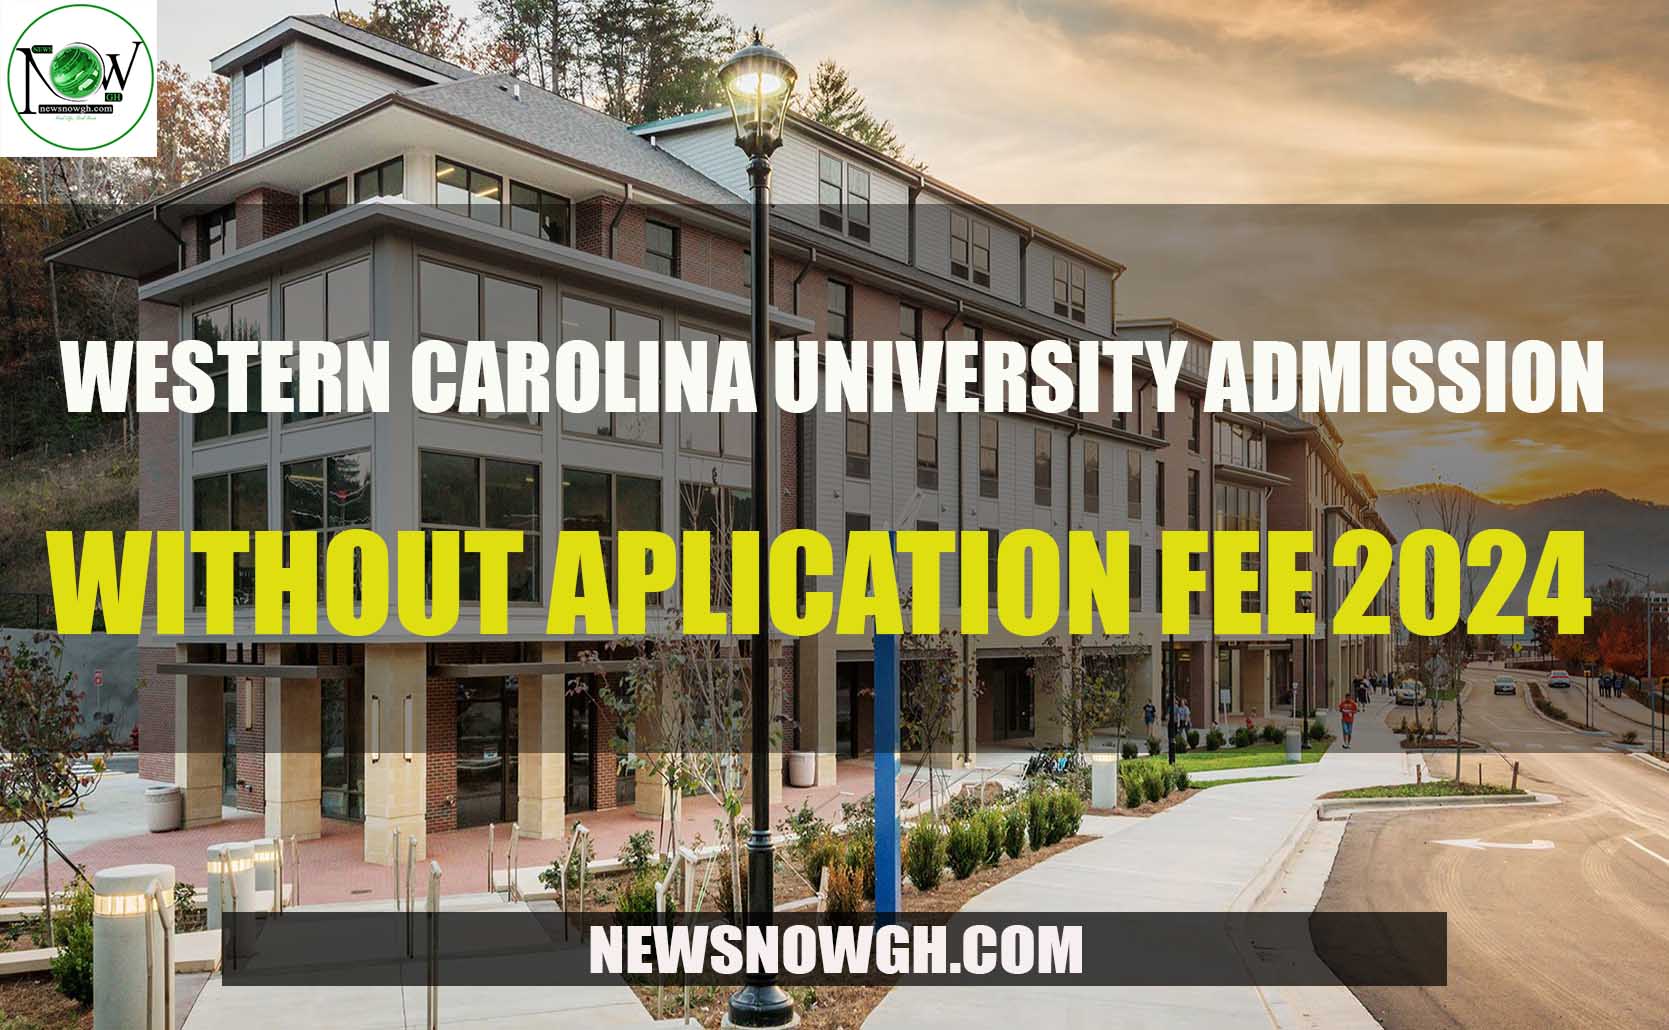 Western Carolina University admissions without application fee for 202425